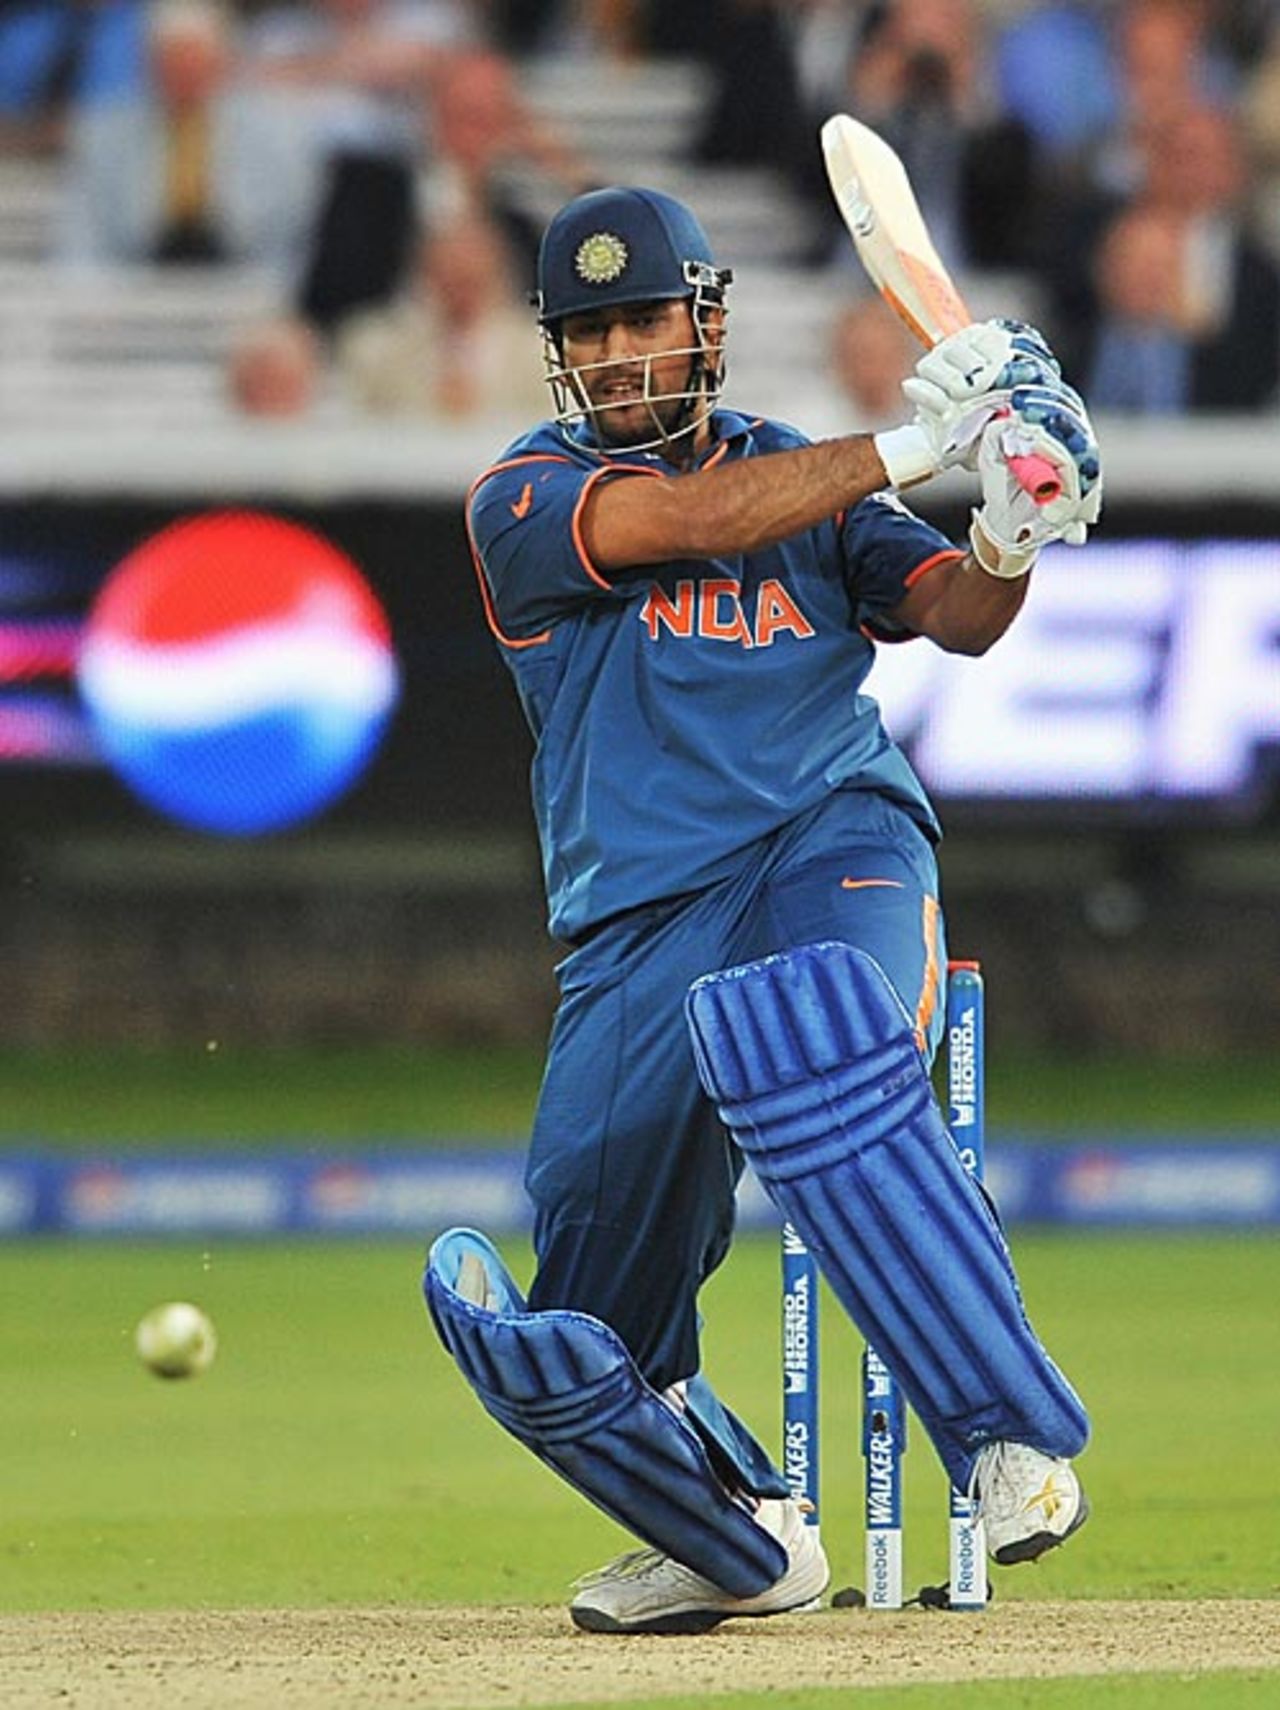 MS Dhoni swats one down the ground, England v India, ICC World Twenty20 Super Eights, Lord's, June 14, 2009 